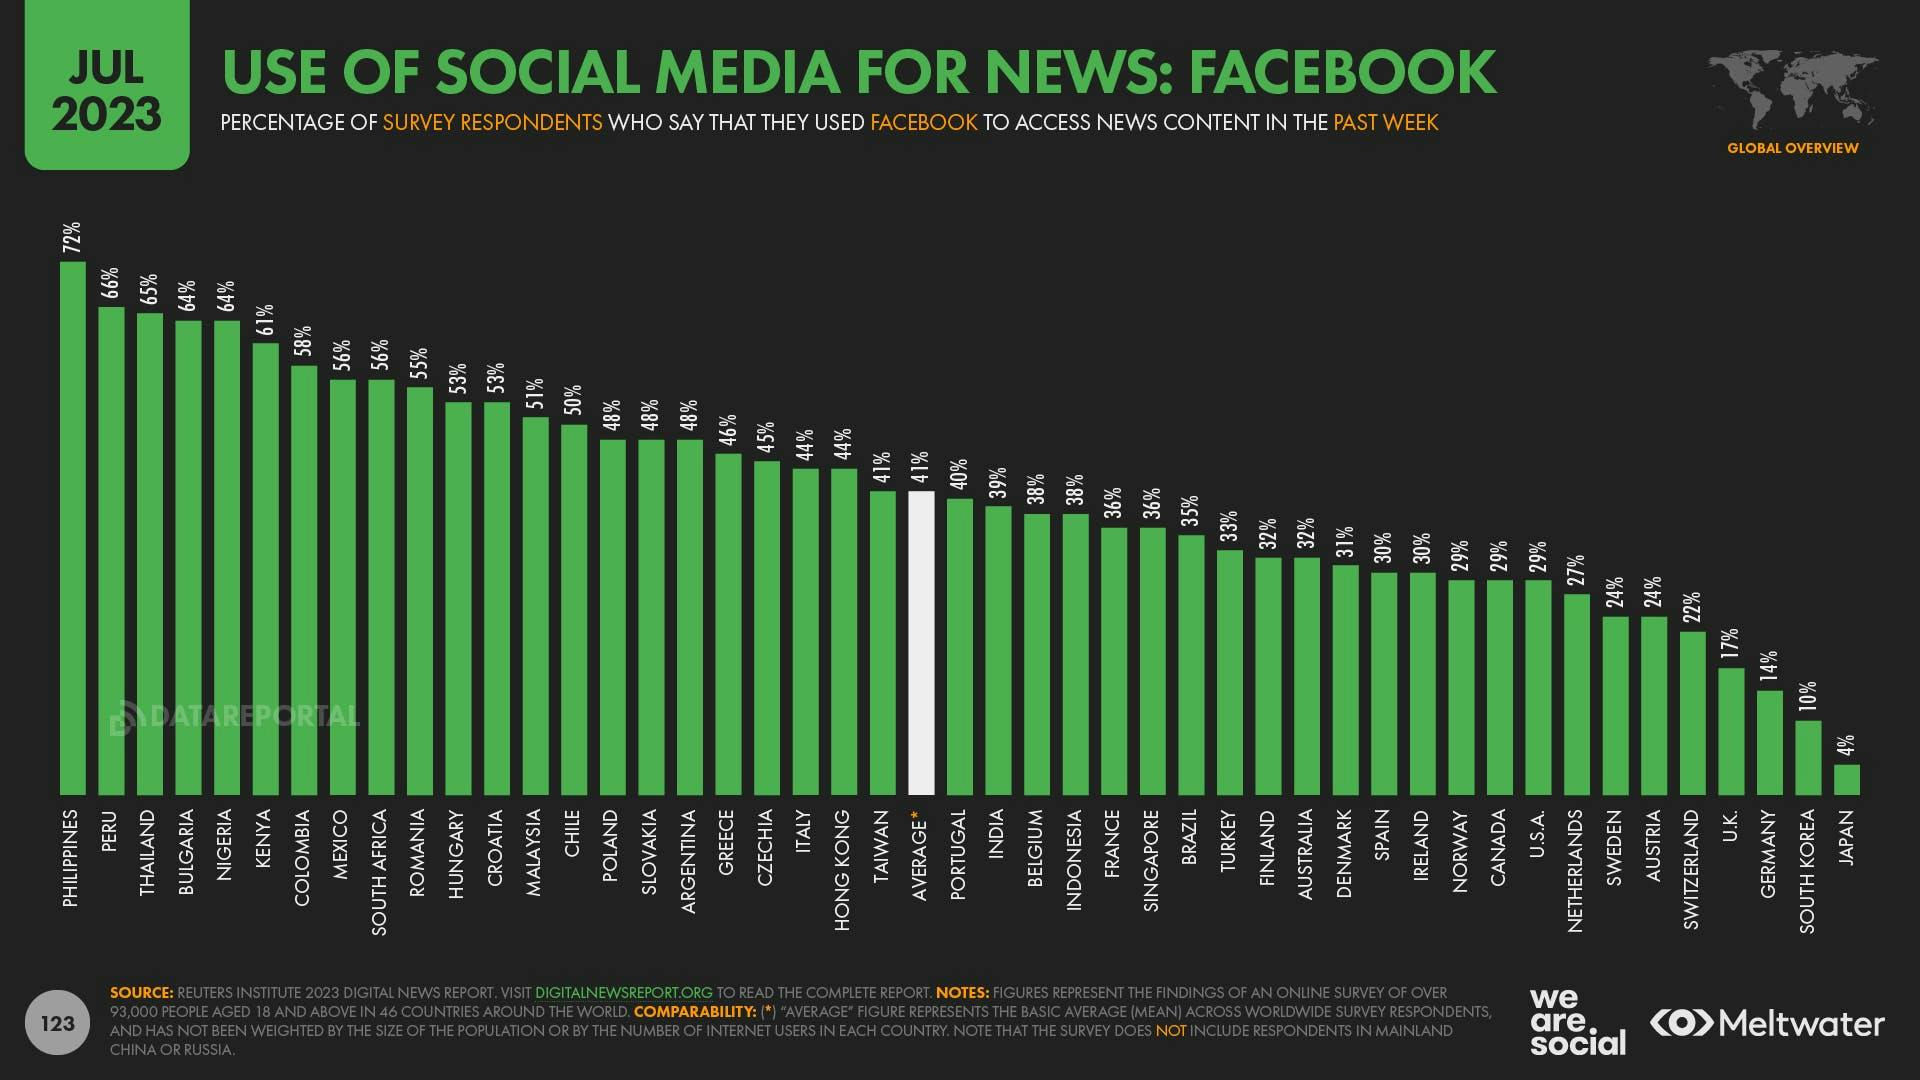 A bar chart showing use of Facebook for news across nations with a global average of 41%, according to RISJ survey data.